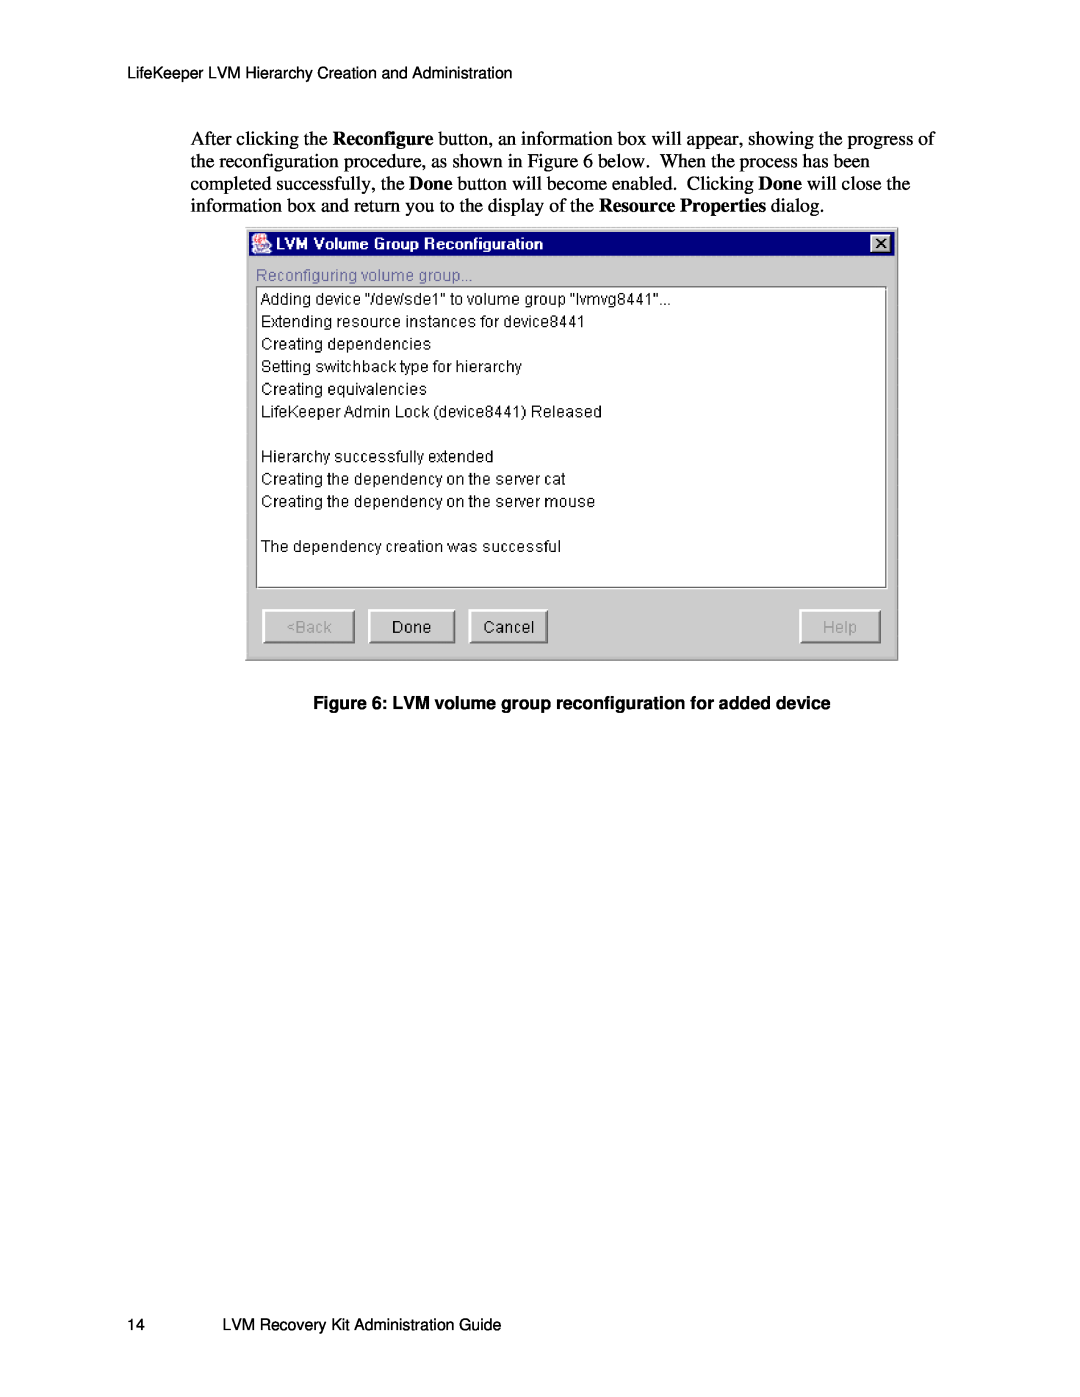 SteelEye 4.5.0 manual LVM volume group reconfiguration for added device 